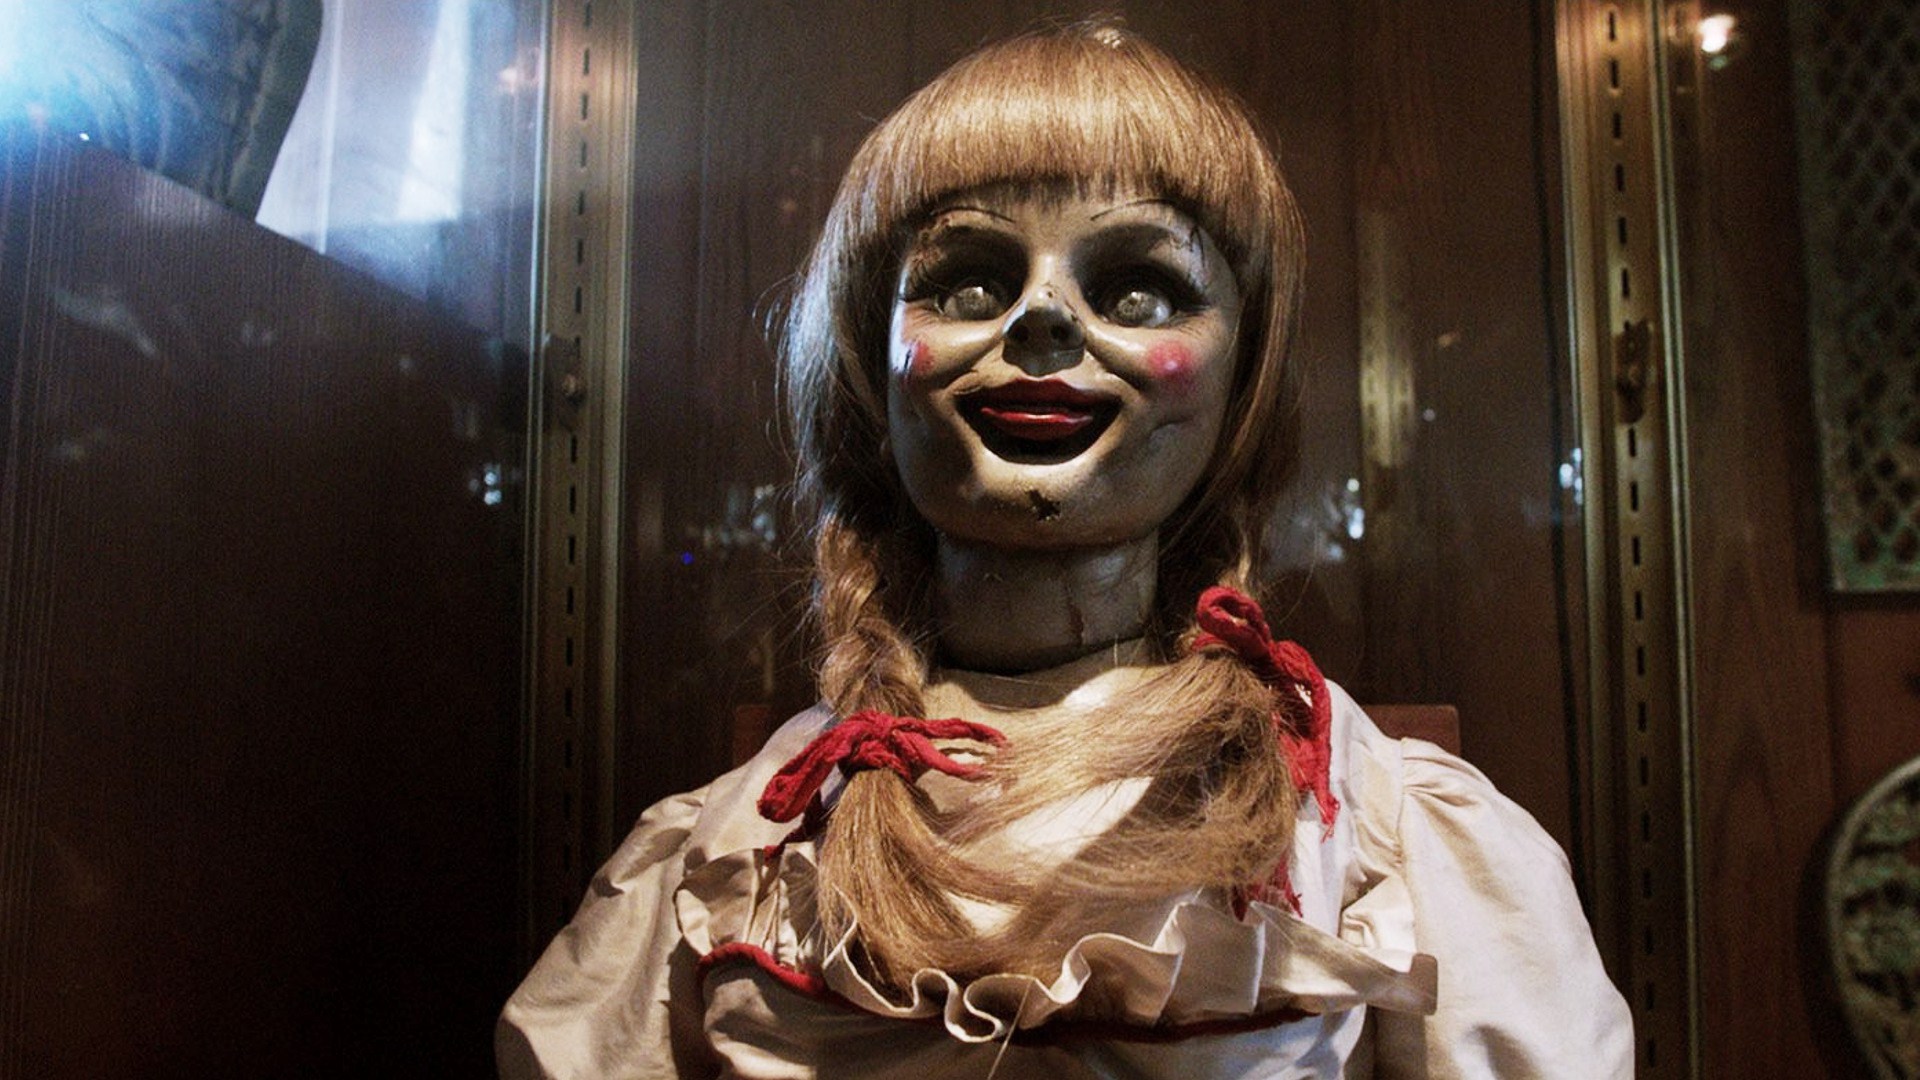 annabelle wallpaper,fiction,performing arts,clown,doll,fictional character